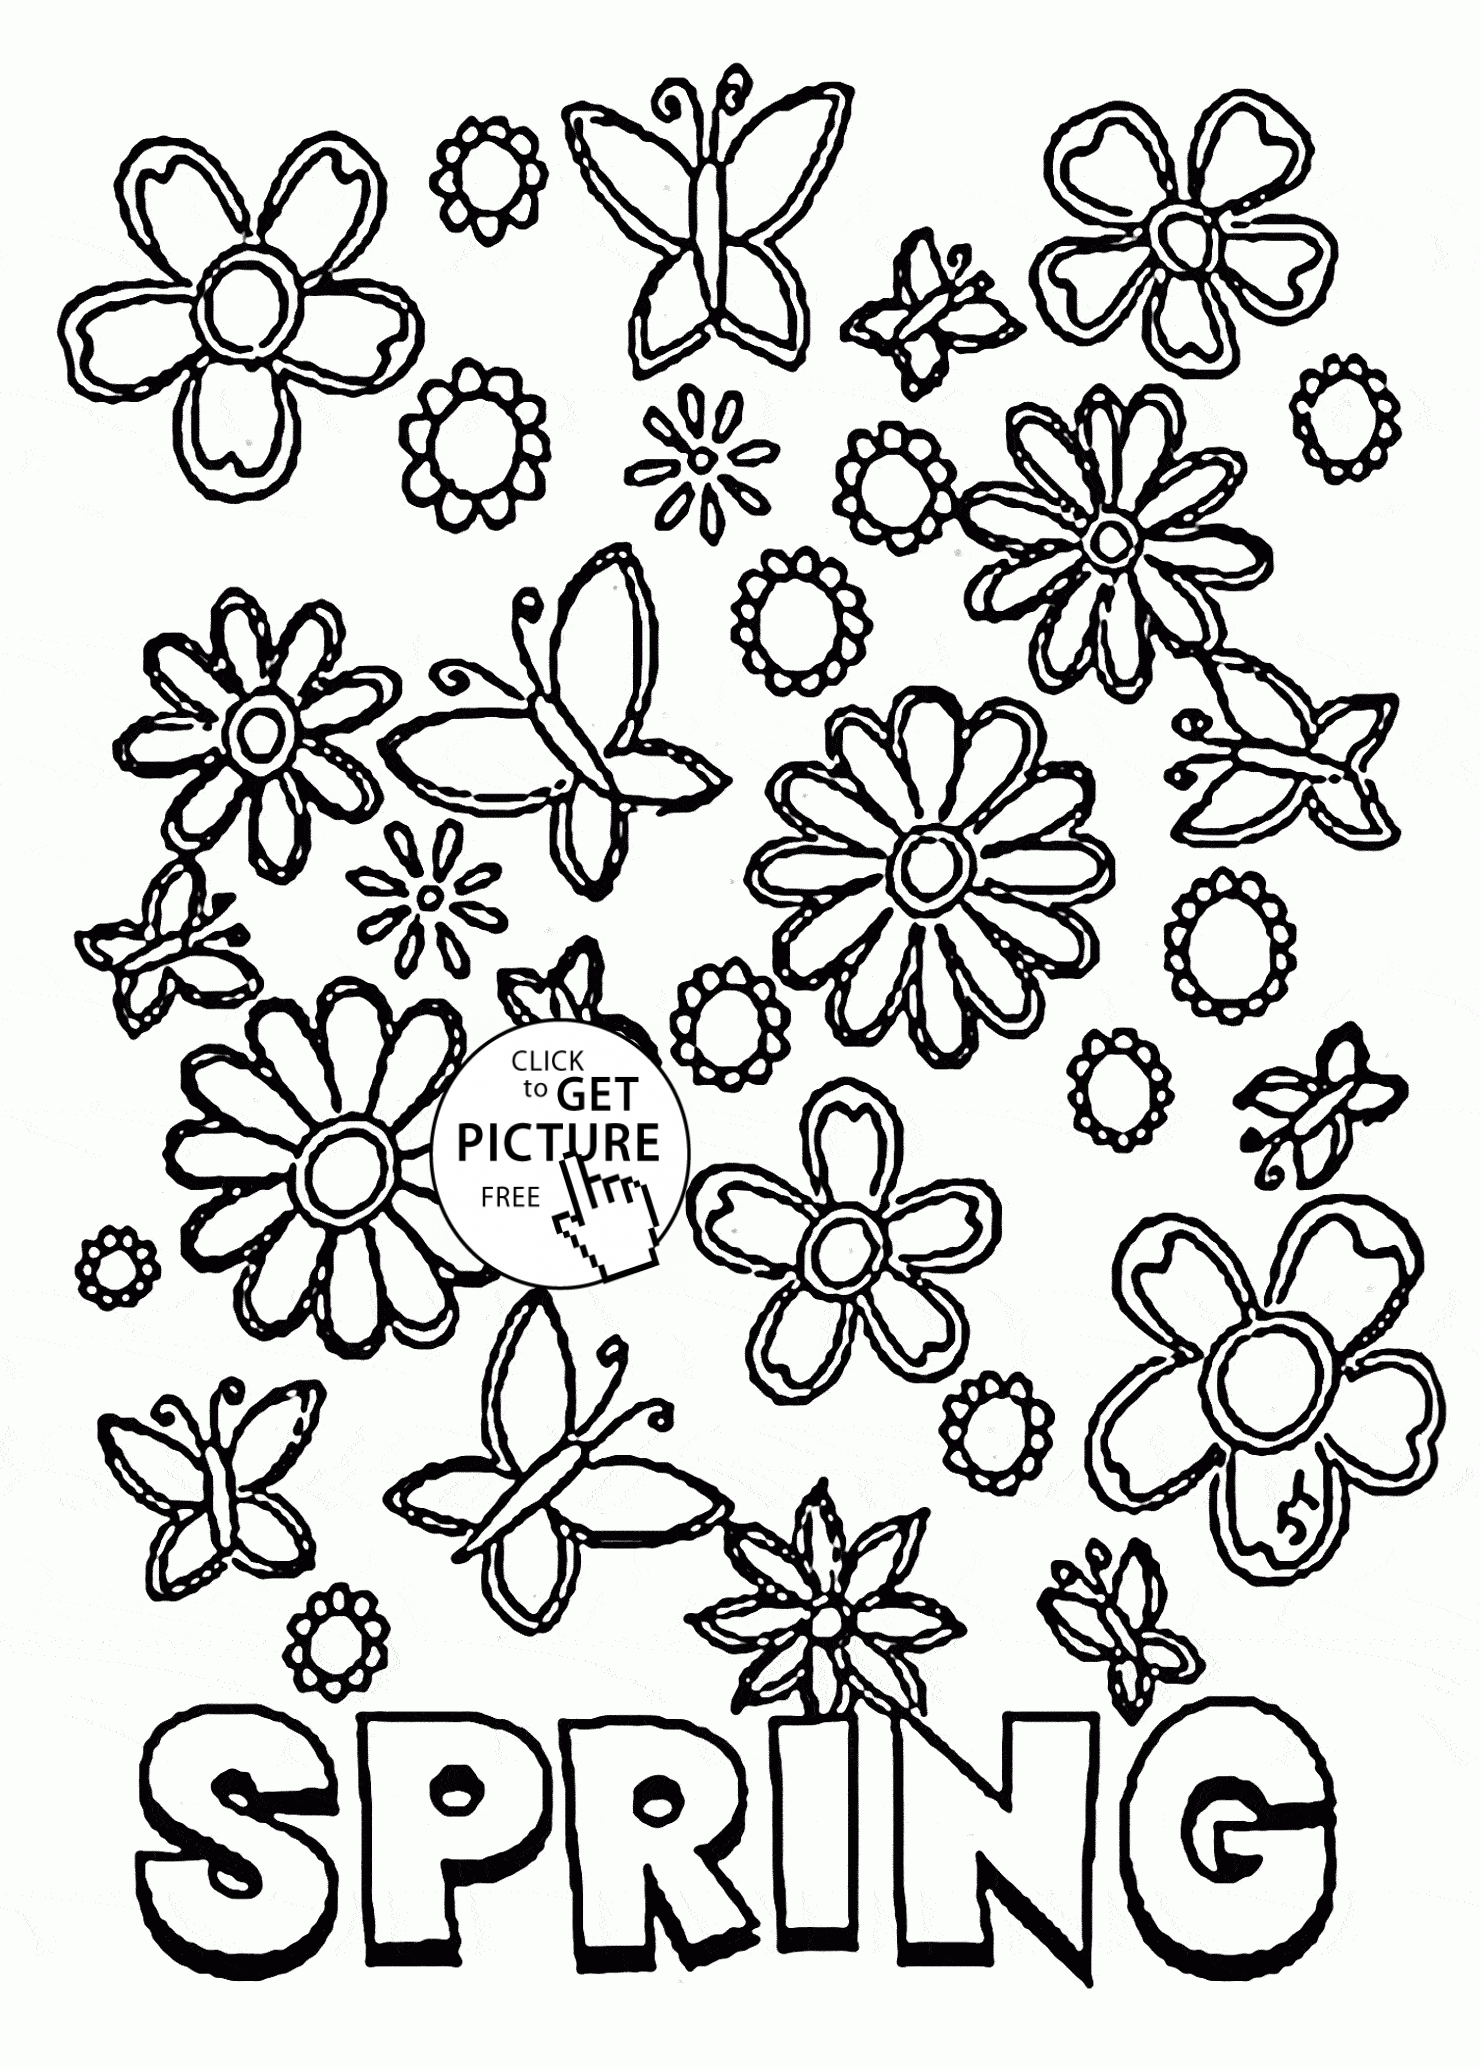 coloring pages of spring flowers spring coloring pages 2018 dr odd flowers of spring coloring pages 